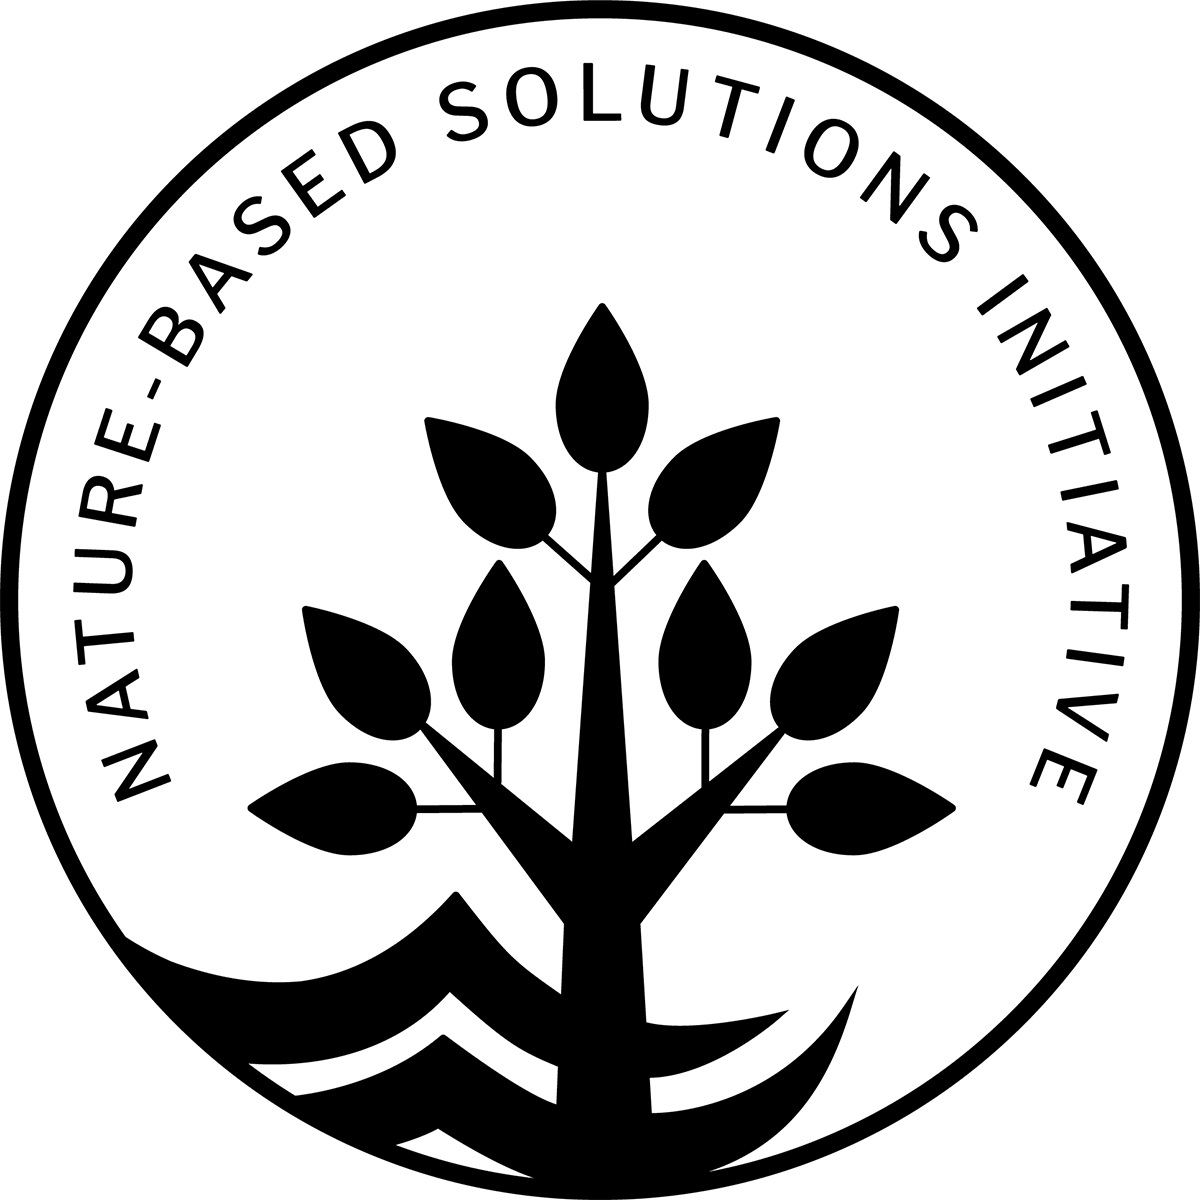 Nature Based Solutions to Global Challenges Foundation Course 2